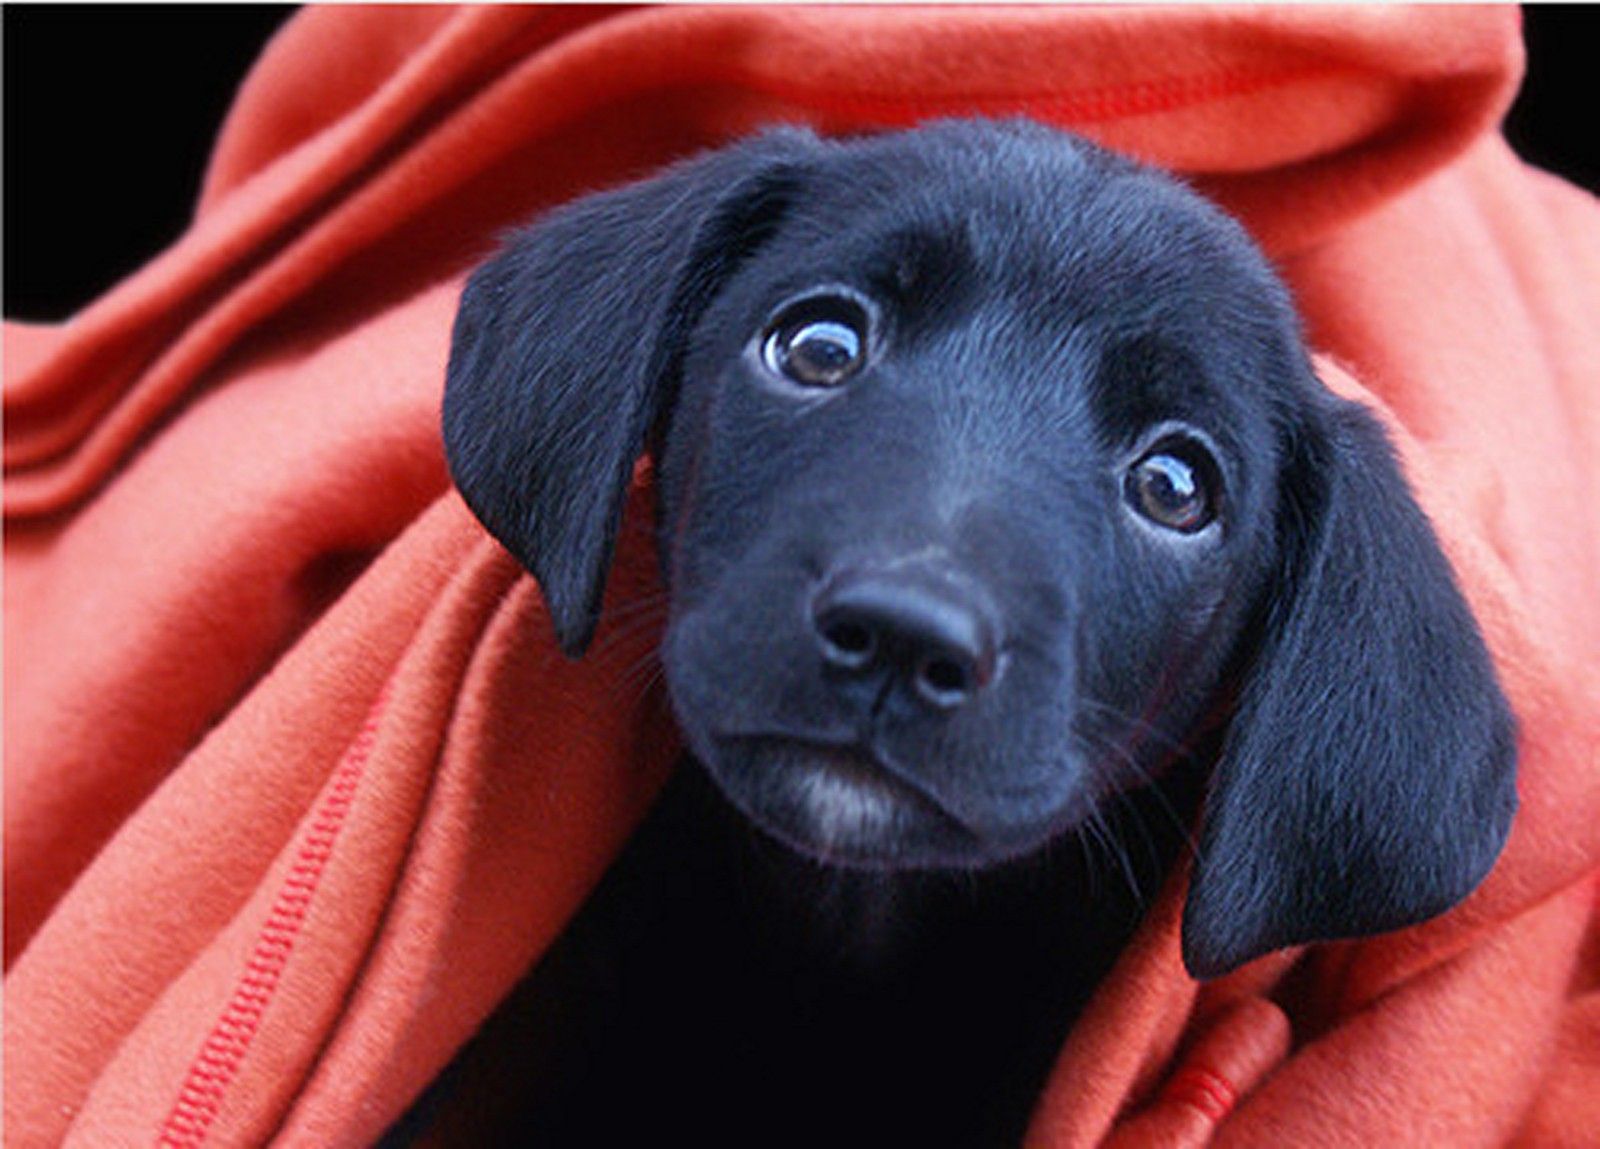 Cute Black Lab Puppies Wallpapers on WallpaperDog